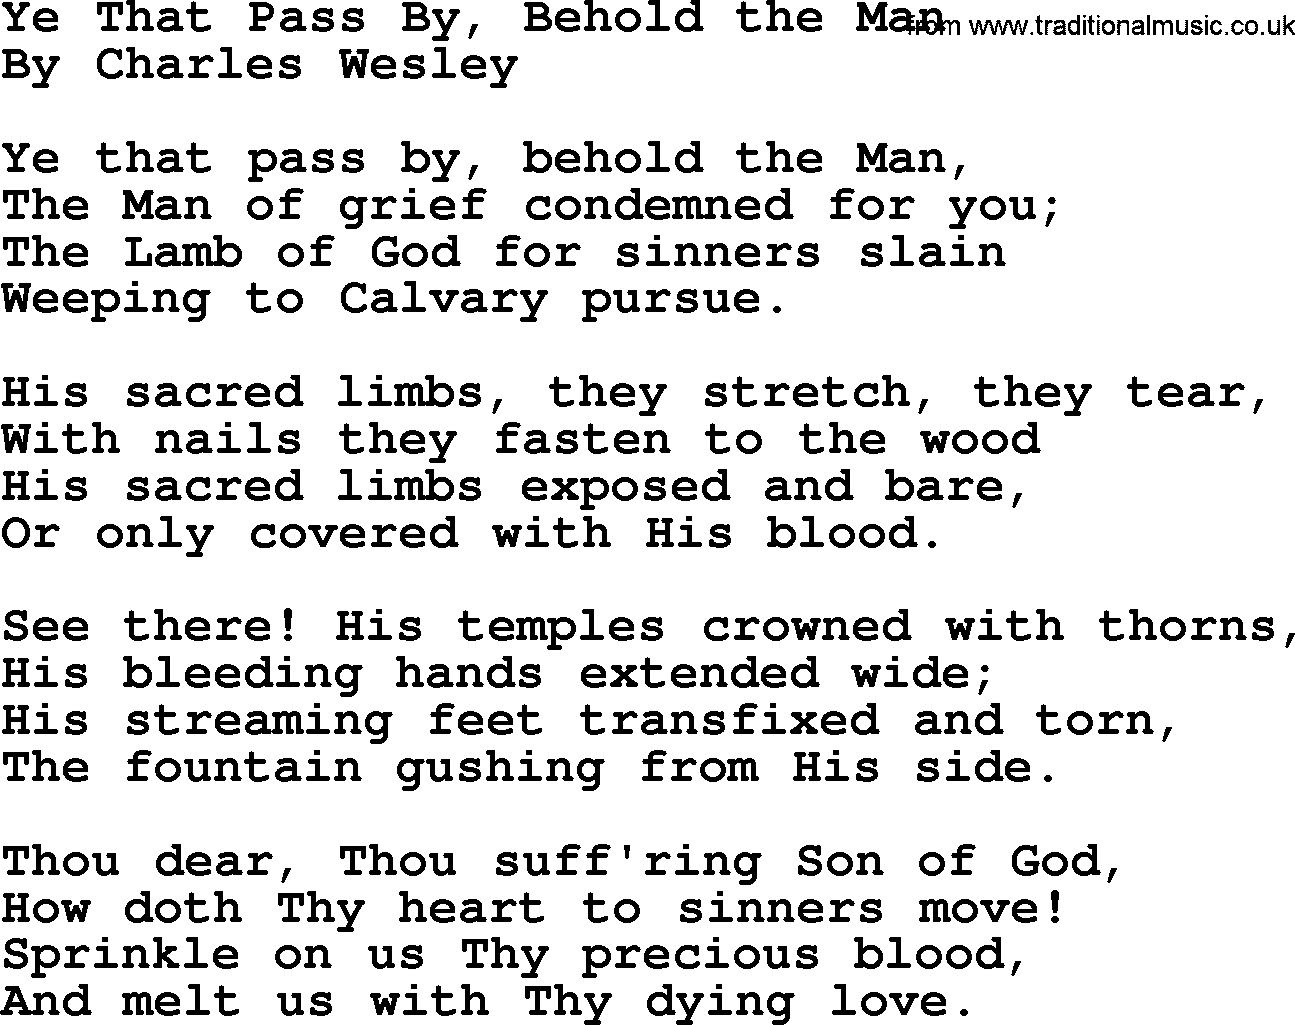 Charles Wesley hymn: Ye That Pass By, Behold the Man, lyrics